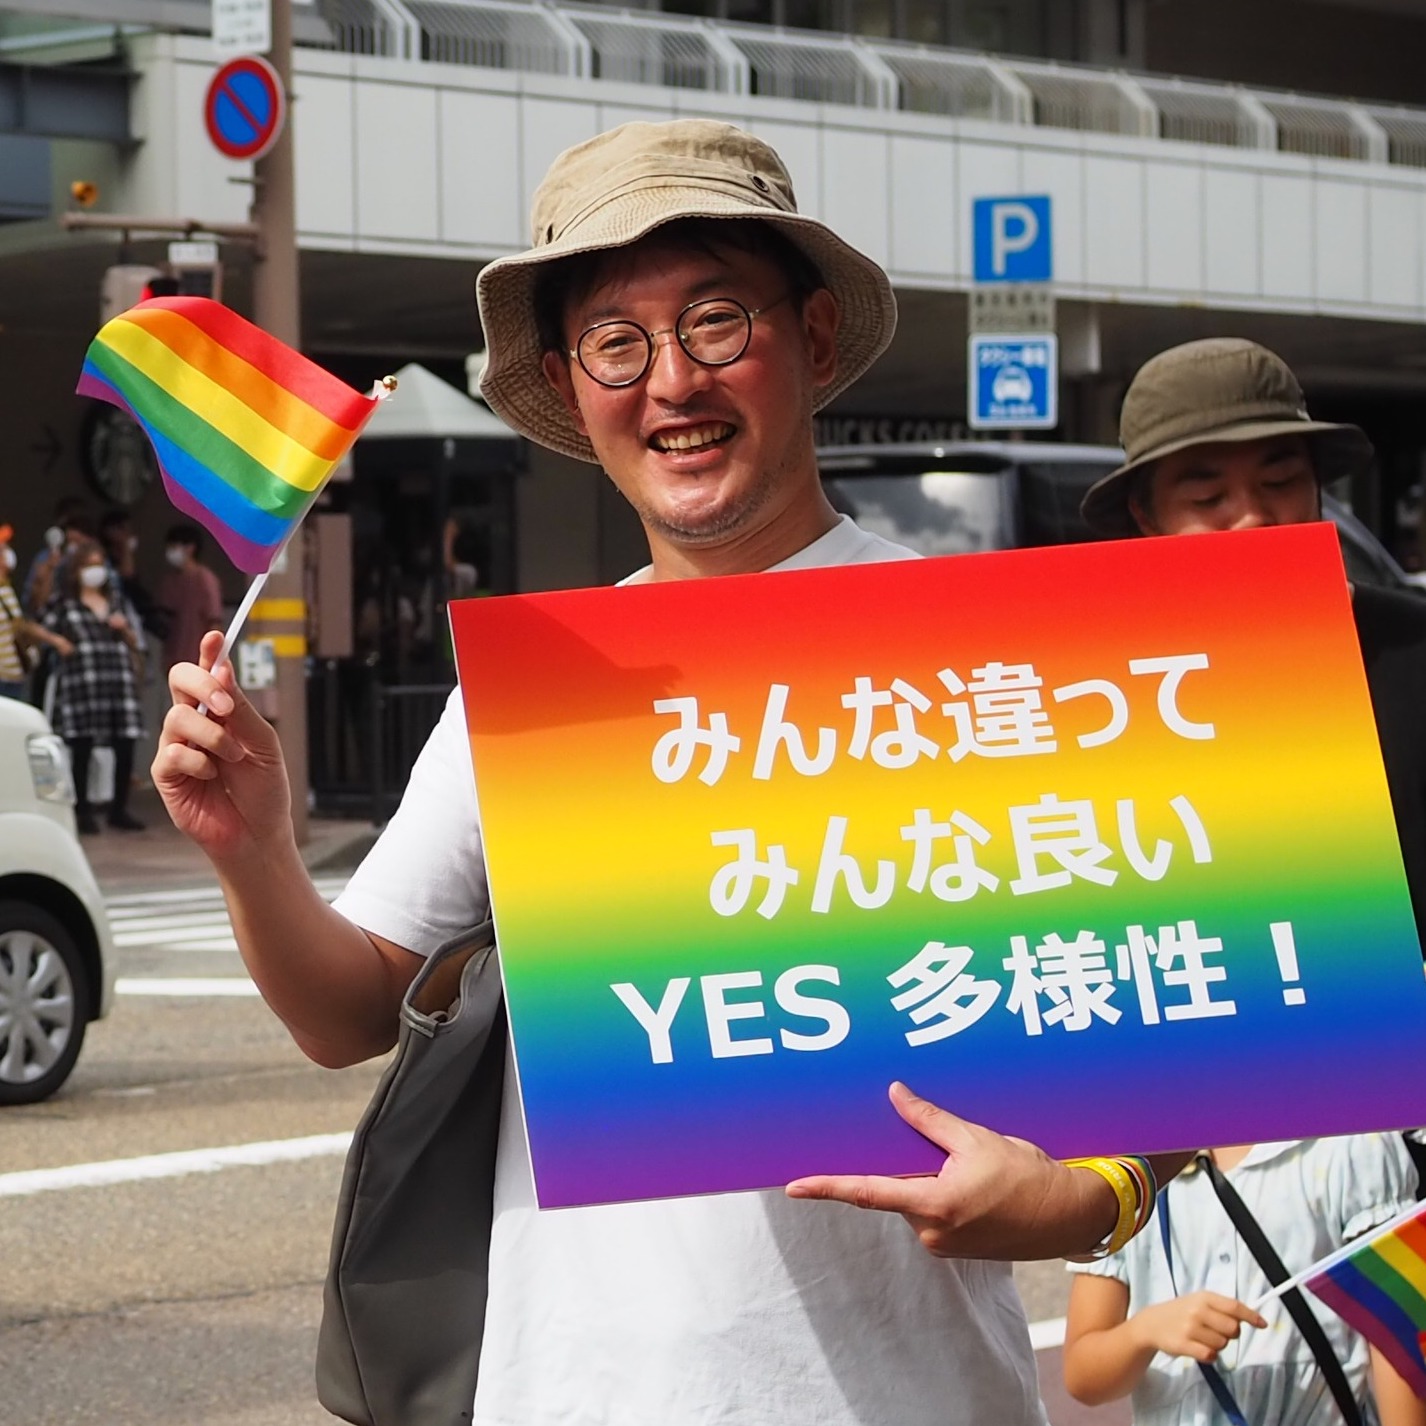 Kaname Inn Tatemachi president, Hiroshi Hosokawa, holding up a sign that translates to "Everyone is different, and everyone is good. 'YES' to diversity!" during the Kanazawa Rainbow Pride Parade